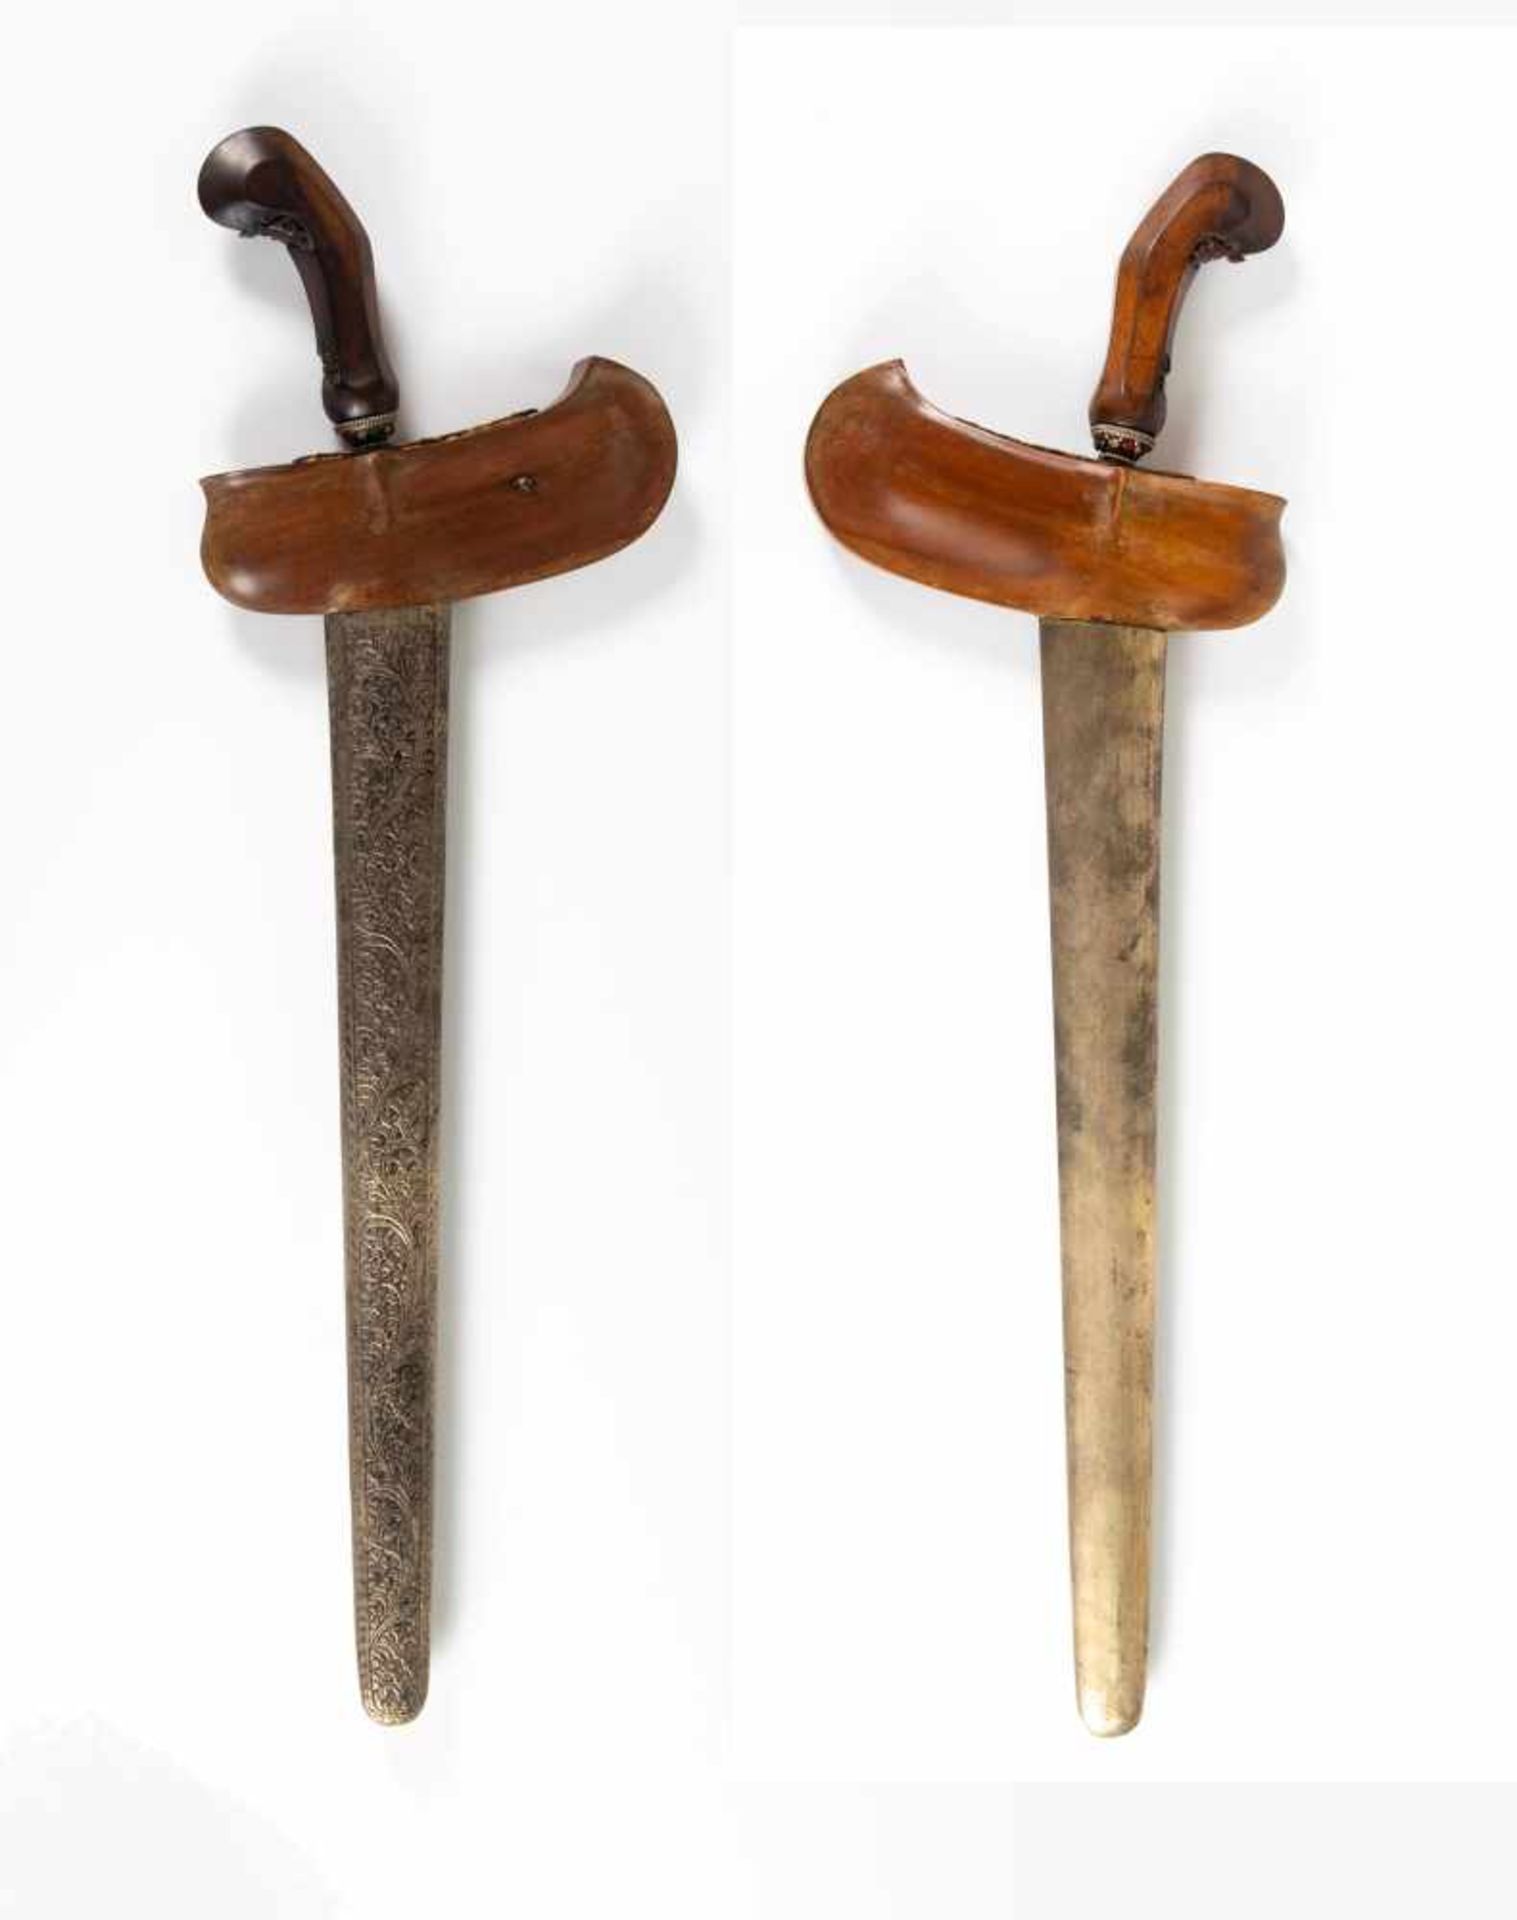 A Javanese Keris Solo, with 18th century blade.A Javanese Keris Solo, with 18th century blade. - Bild 2 aus 8